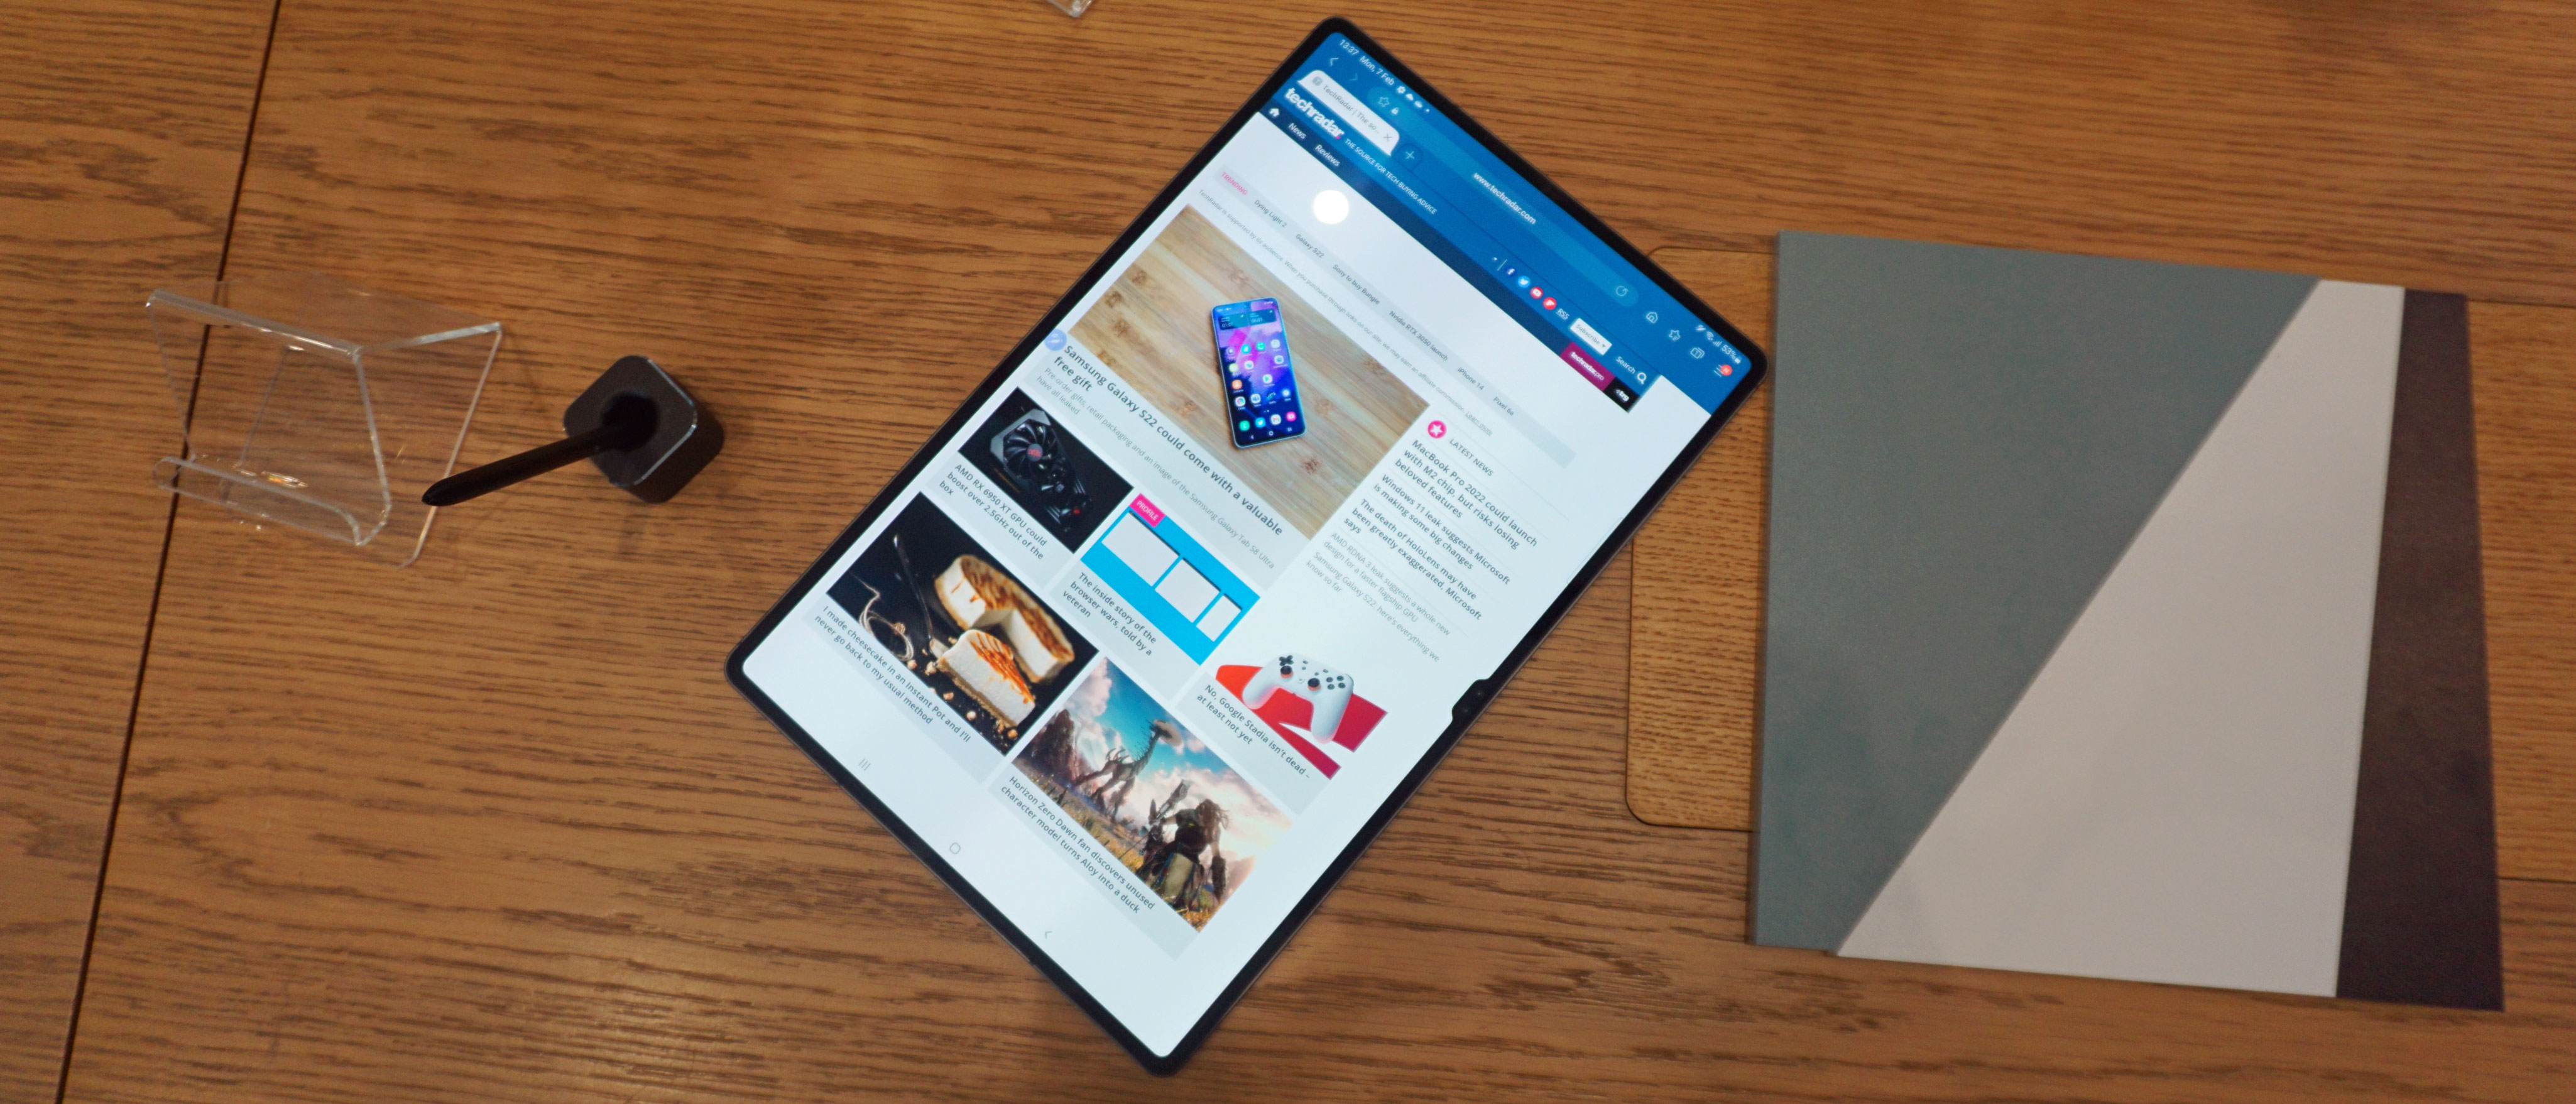 Samsung Galaxy Tab S8 Ultra Tablet Review: Isn't That A Bit Too Much?